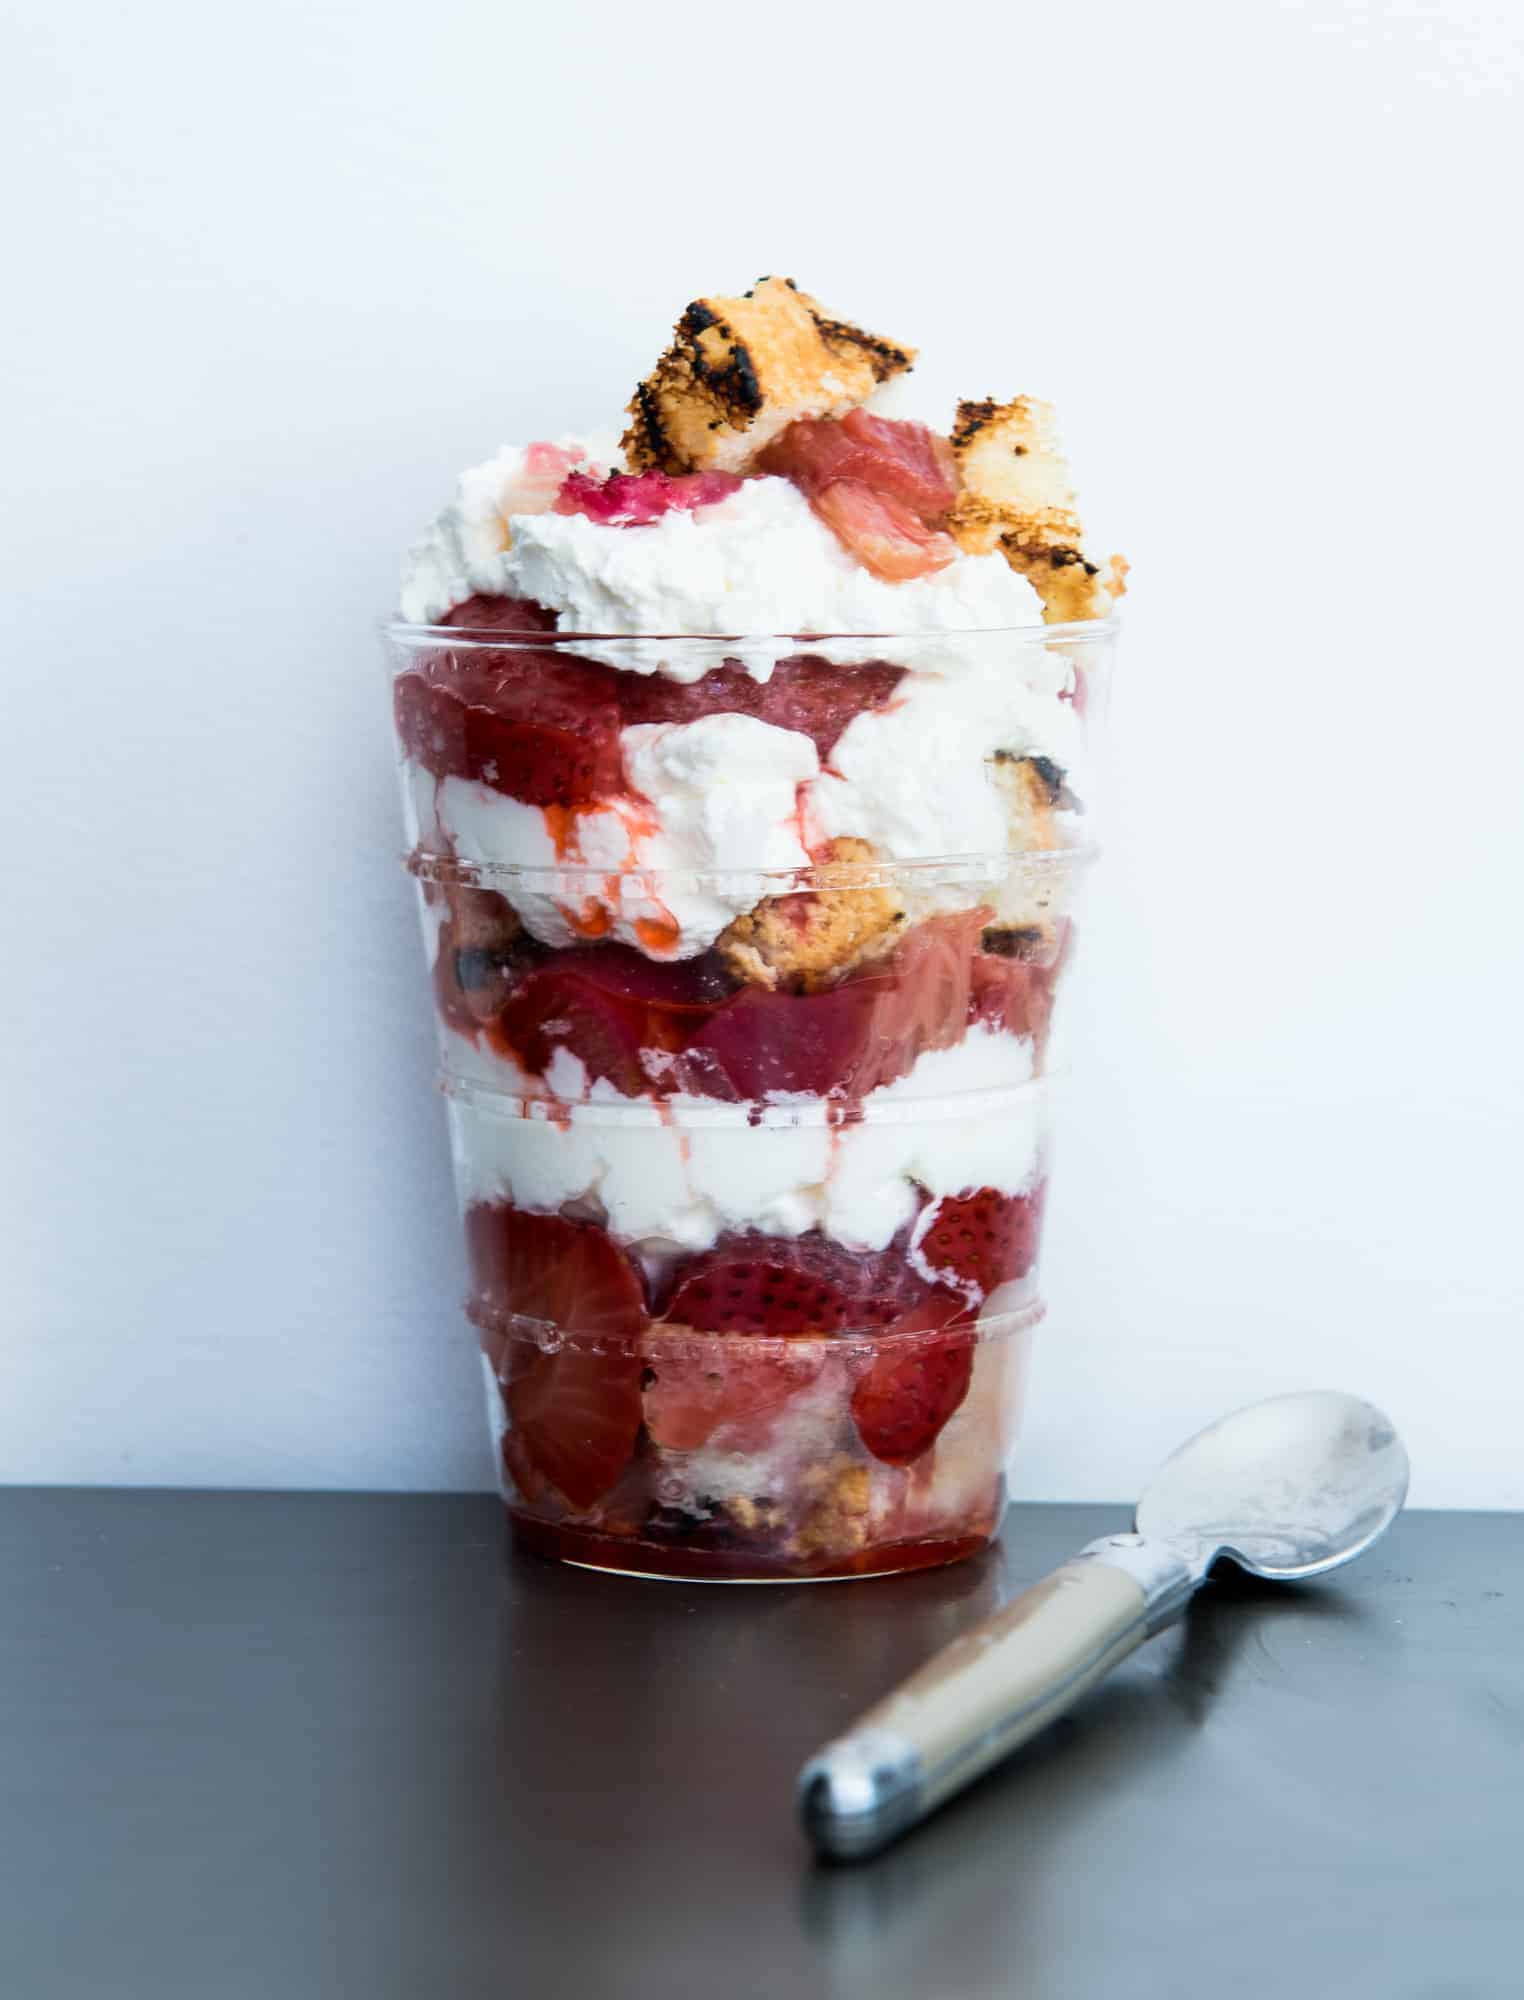 A clear glass containing a grilled rhubarb and strawberry parfait. Layers of grilled angel food cake, whipped cream, grilled strawberries and grilled rhubarb